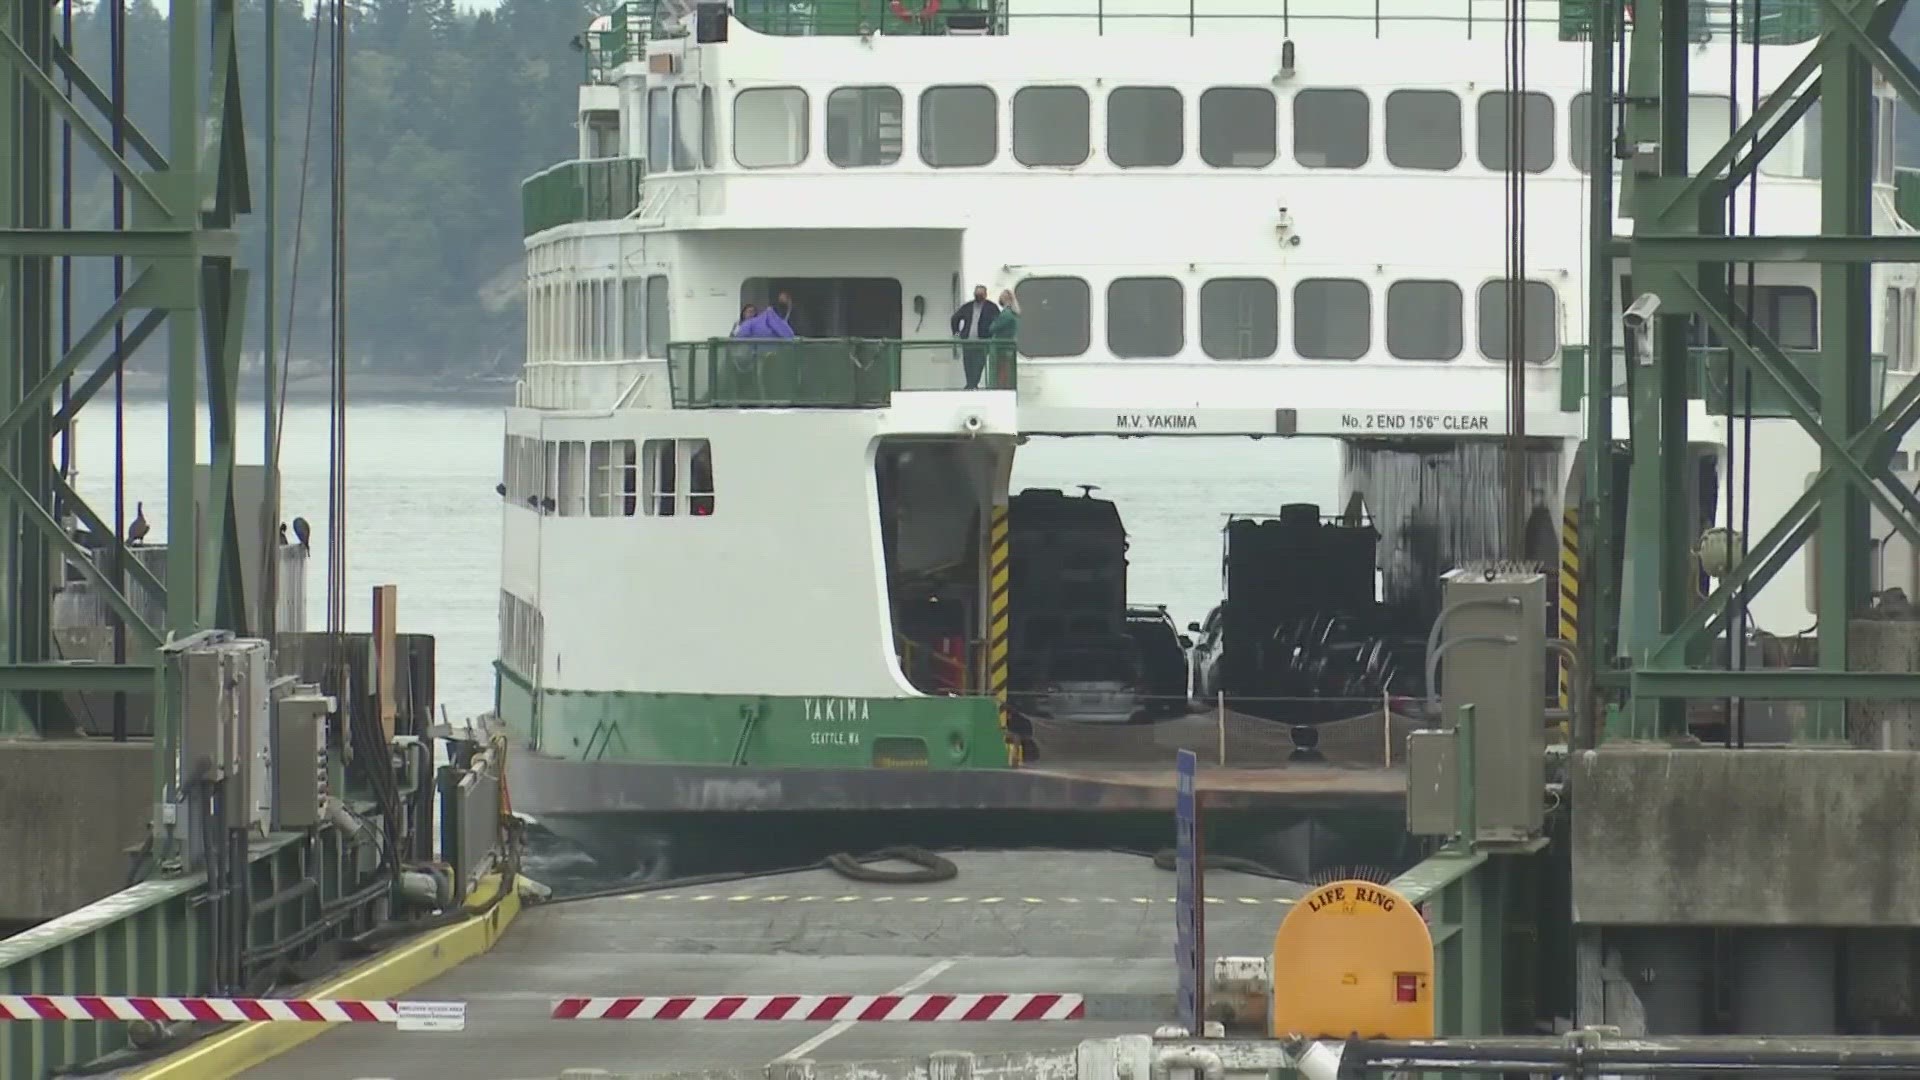 The ferry system is still grappling with a shortage of experienced mariners. Many of the positions that need filling take months to years to qualify for.